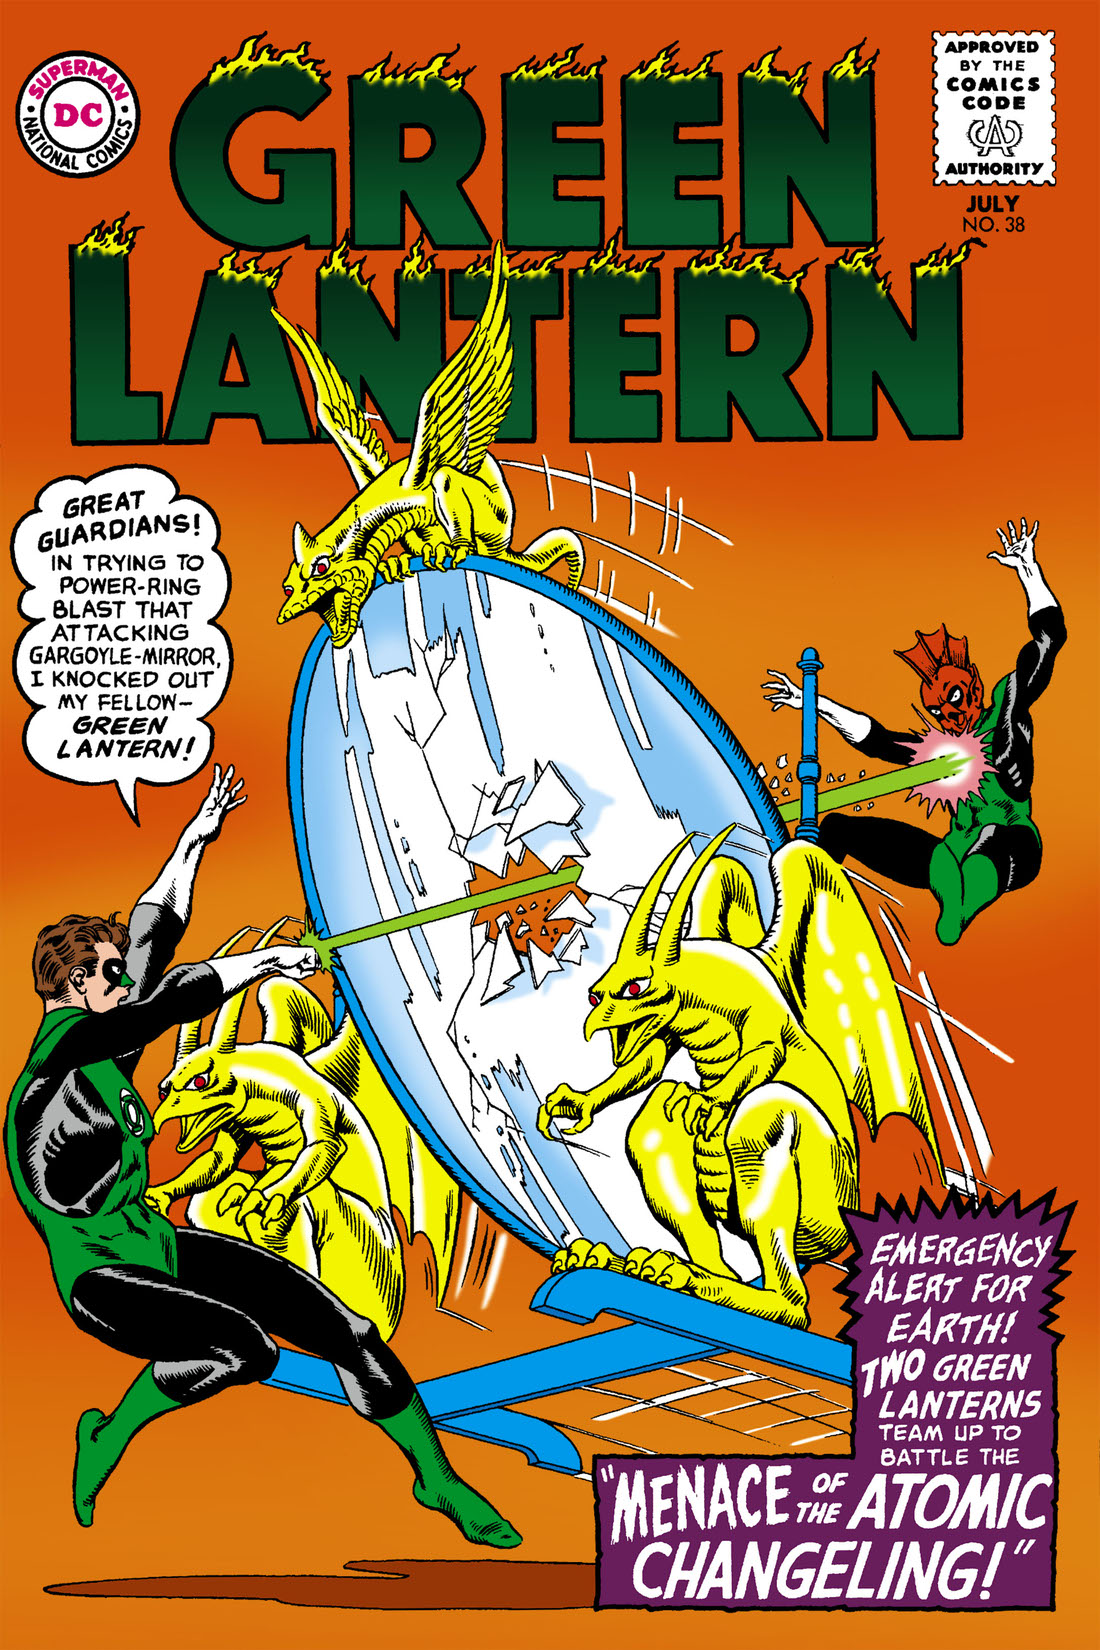 Green Lantern (1960-) #38 preview images